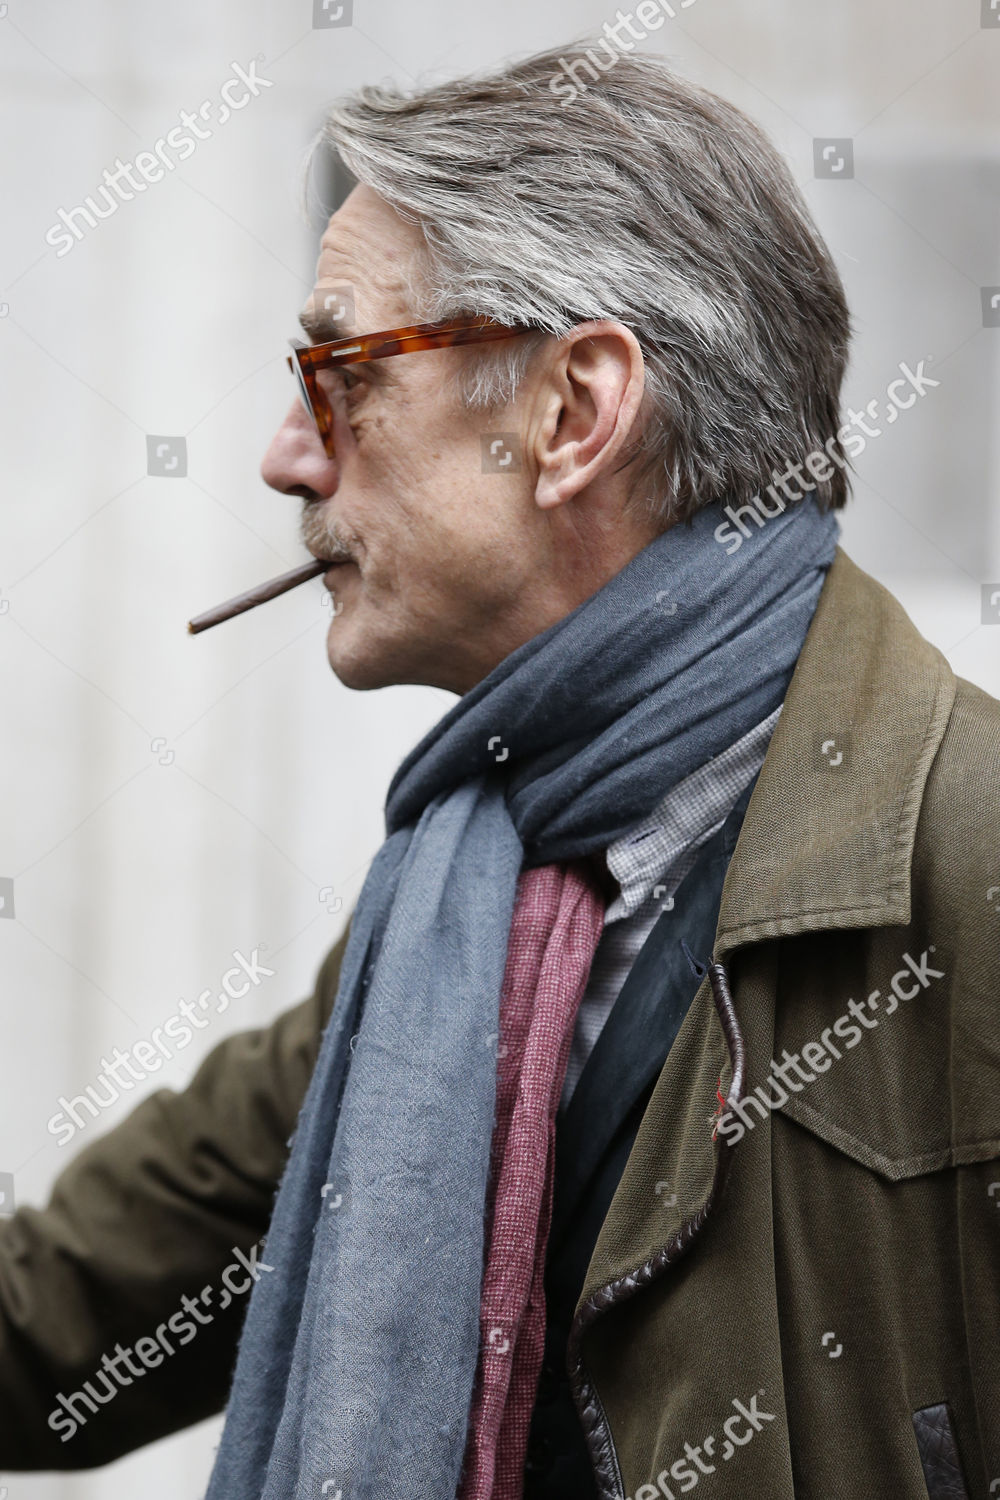 Jeremy Irons smoking a cigarette (or weed)
